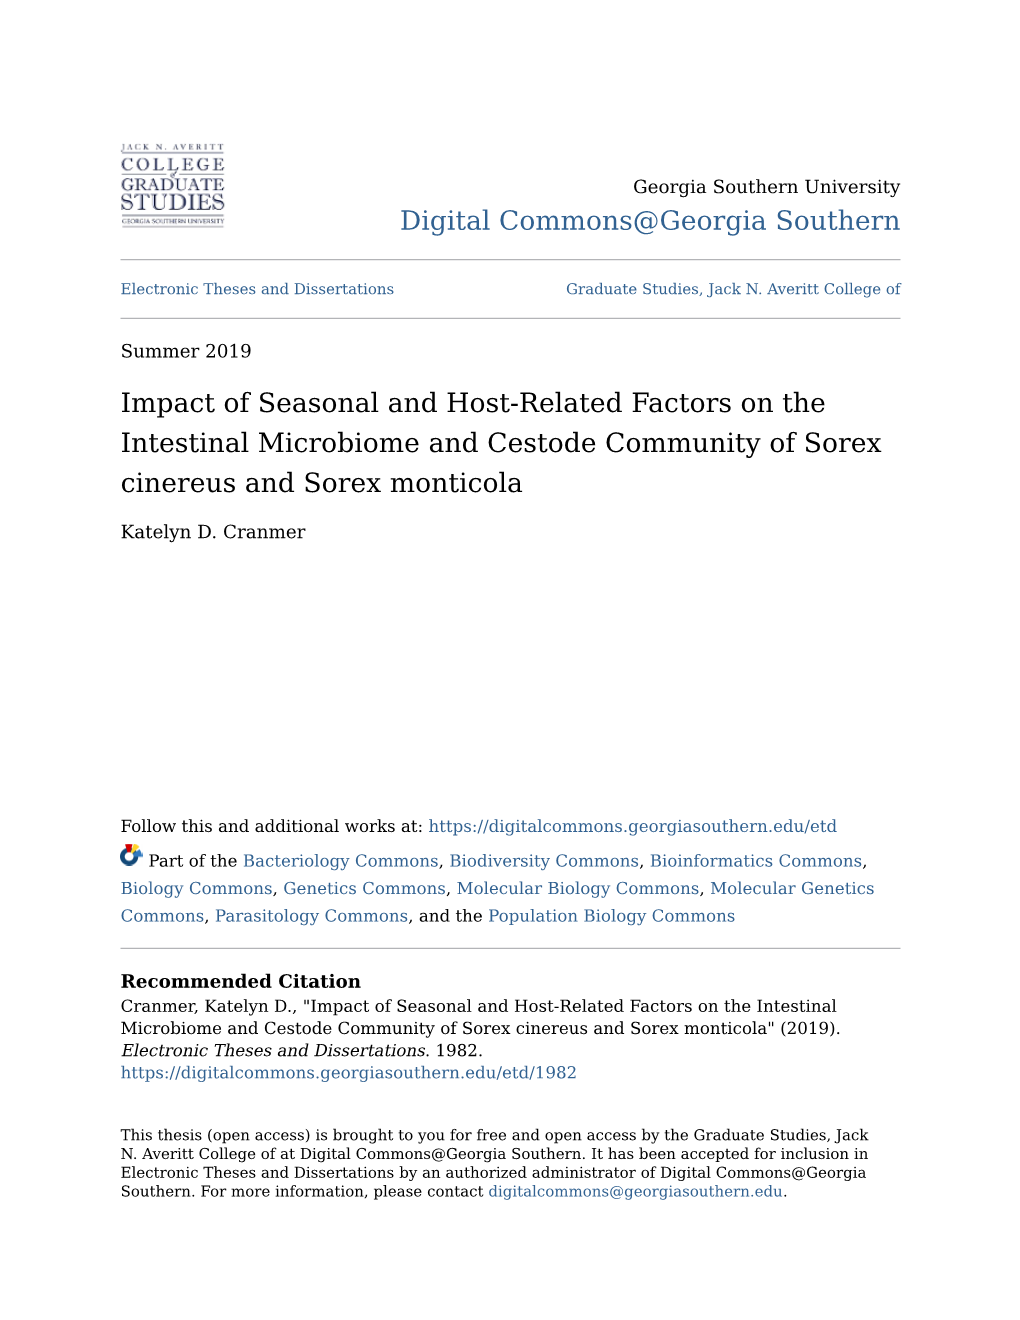 Impact of Seasonal and Host-Related Factors on the Intestinal Microbiome and Cestode Community of Sorex Cinereus and Sorex Monticola